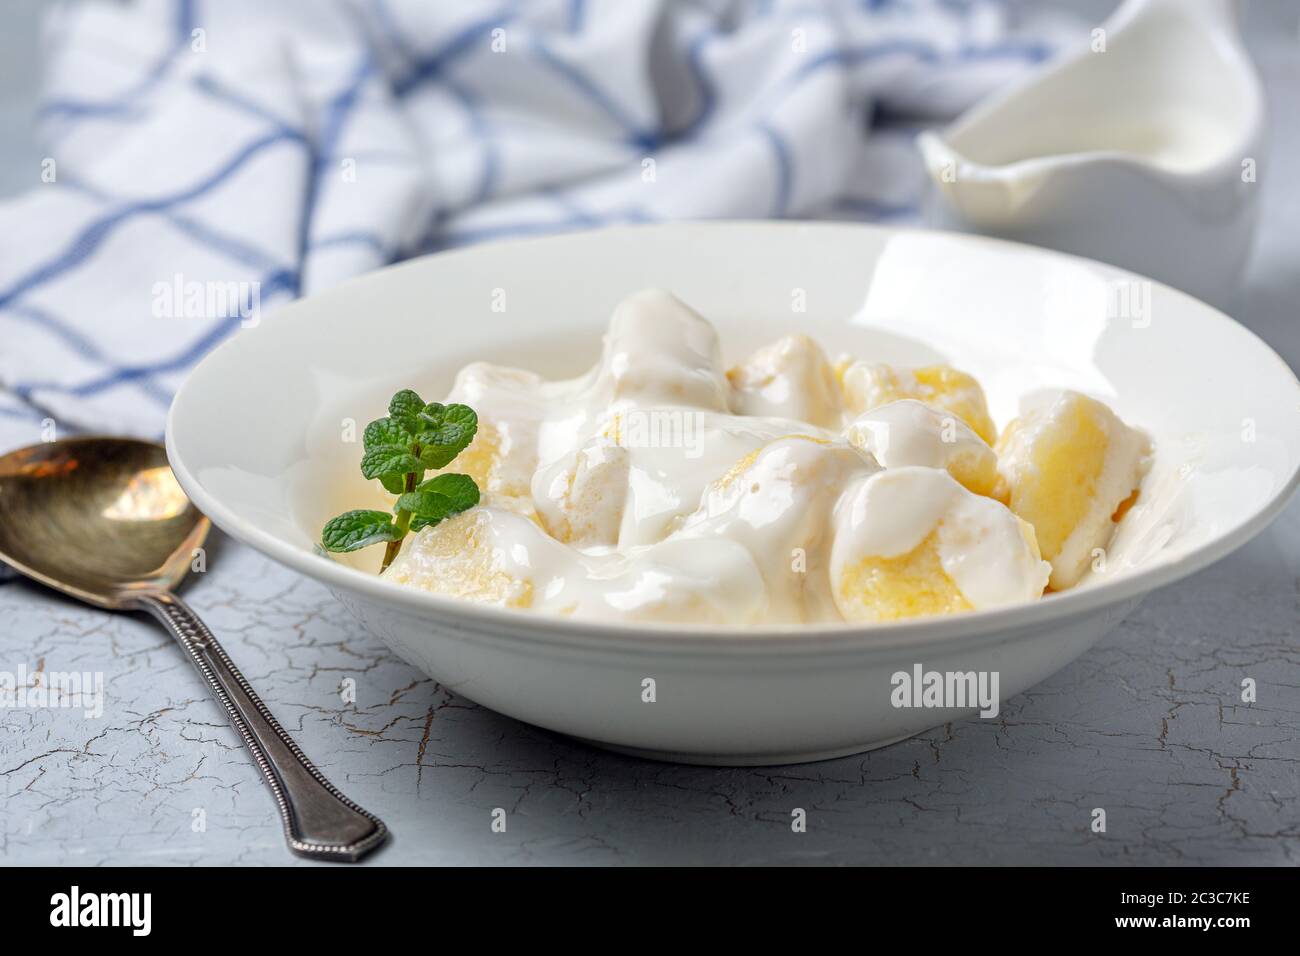 Traditional cottage cheese gnocchi (lazy dumplings). Stock Photo